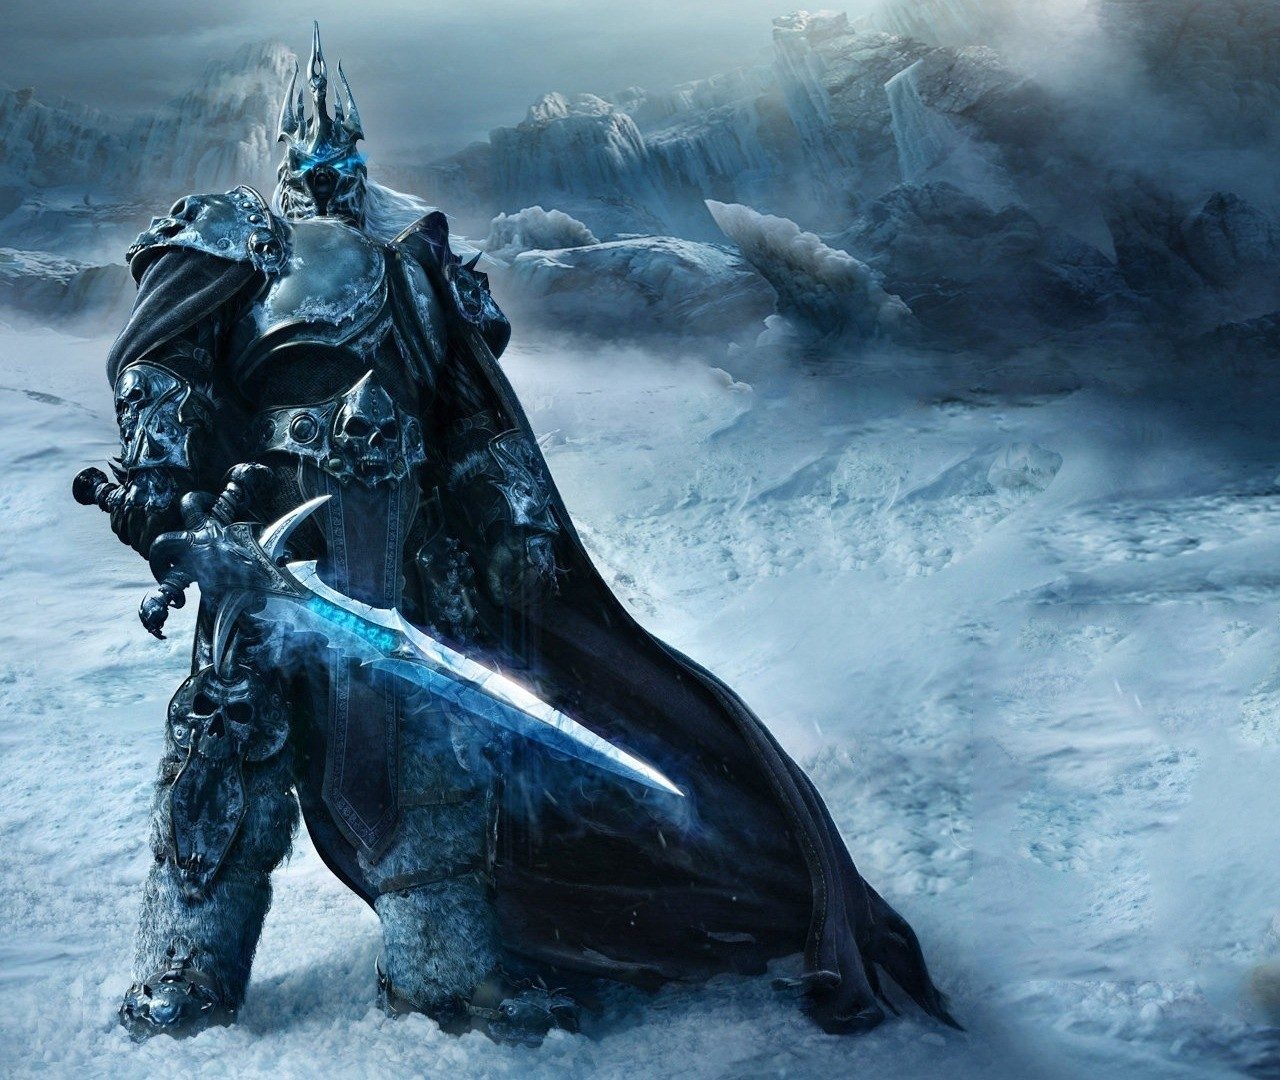 Uhd 4k Game Wallpaper Winter Hd Wallpapers , Hd Backgrounds,tumblr - Wrath Of The Lich King Hd - HD Wallpaper 